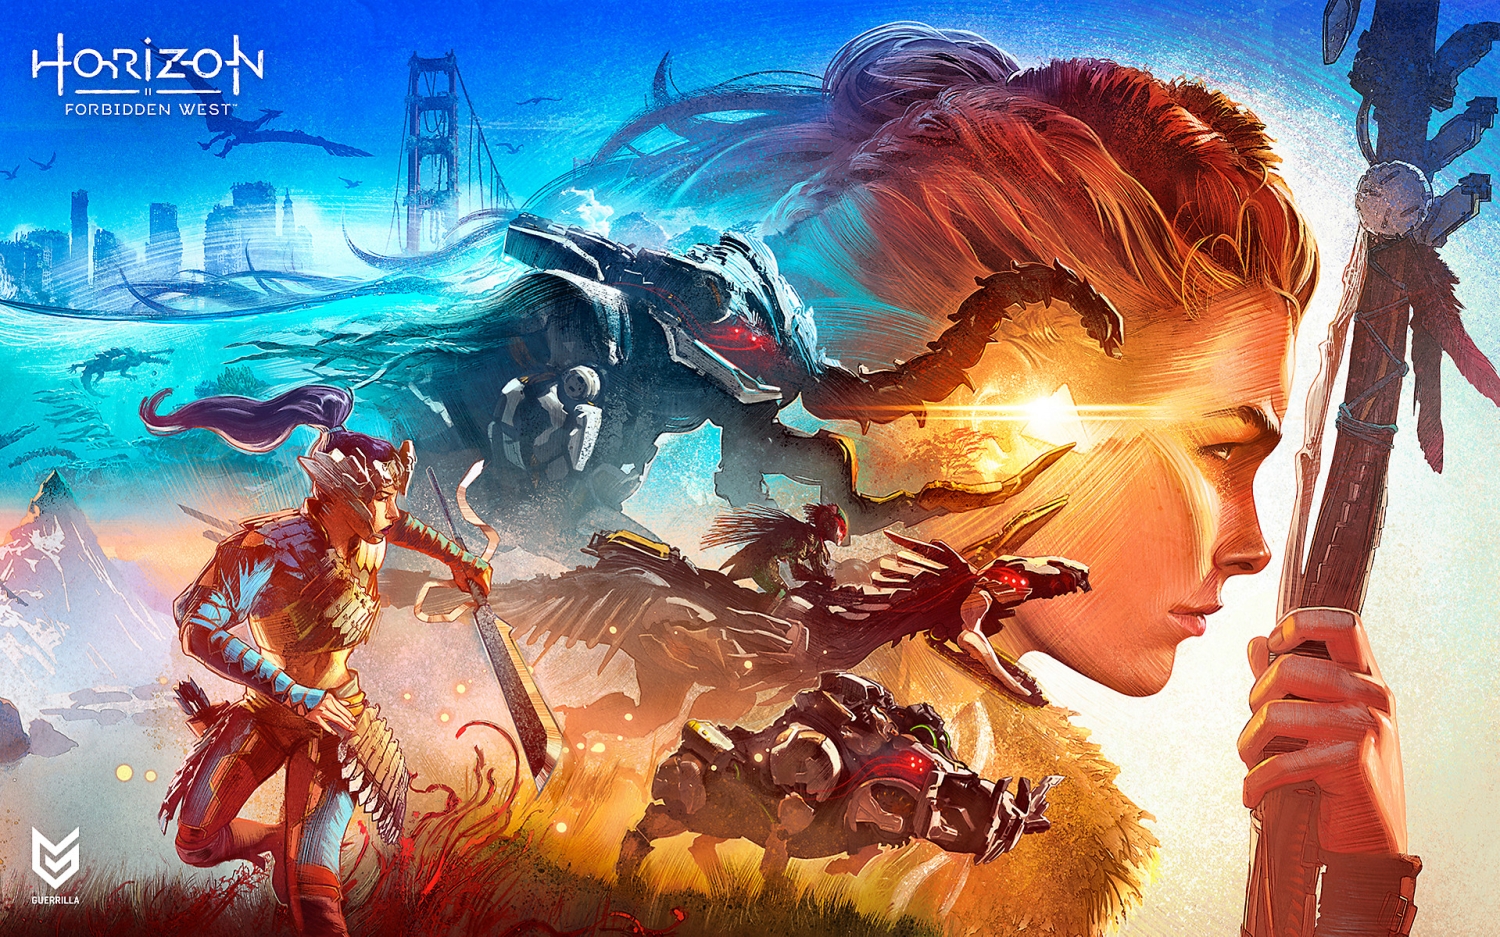 Rumor: Horizon multiplayer game coming to PS5 and PC with co-op, horizon  zero dawn 2 